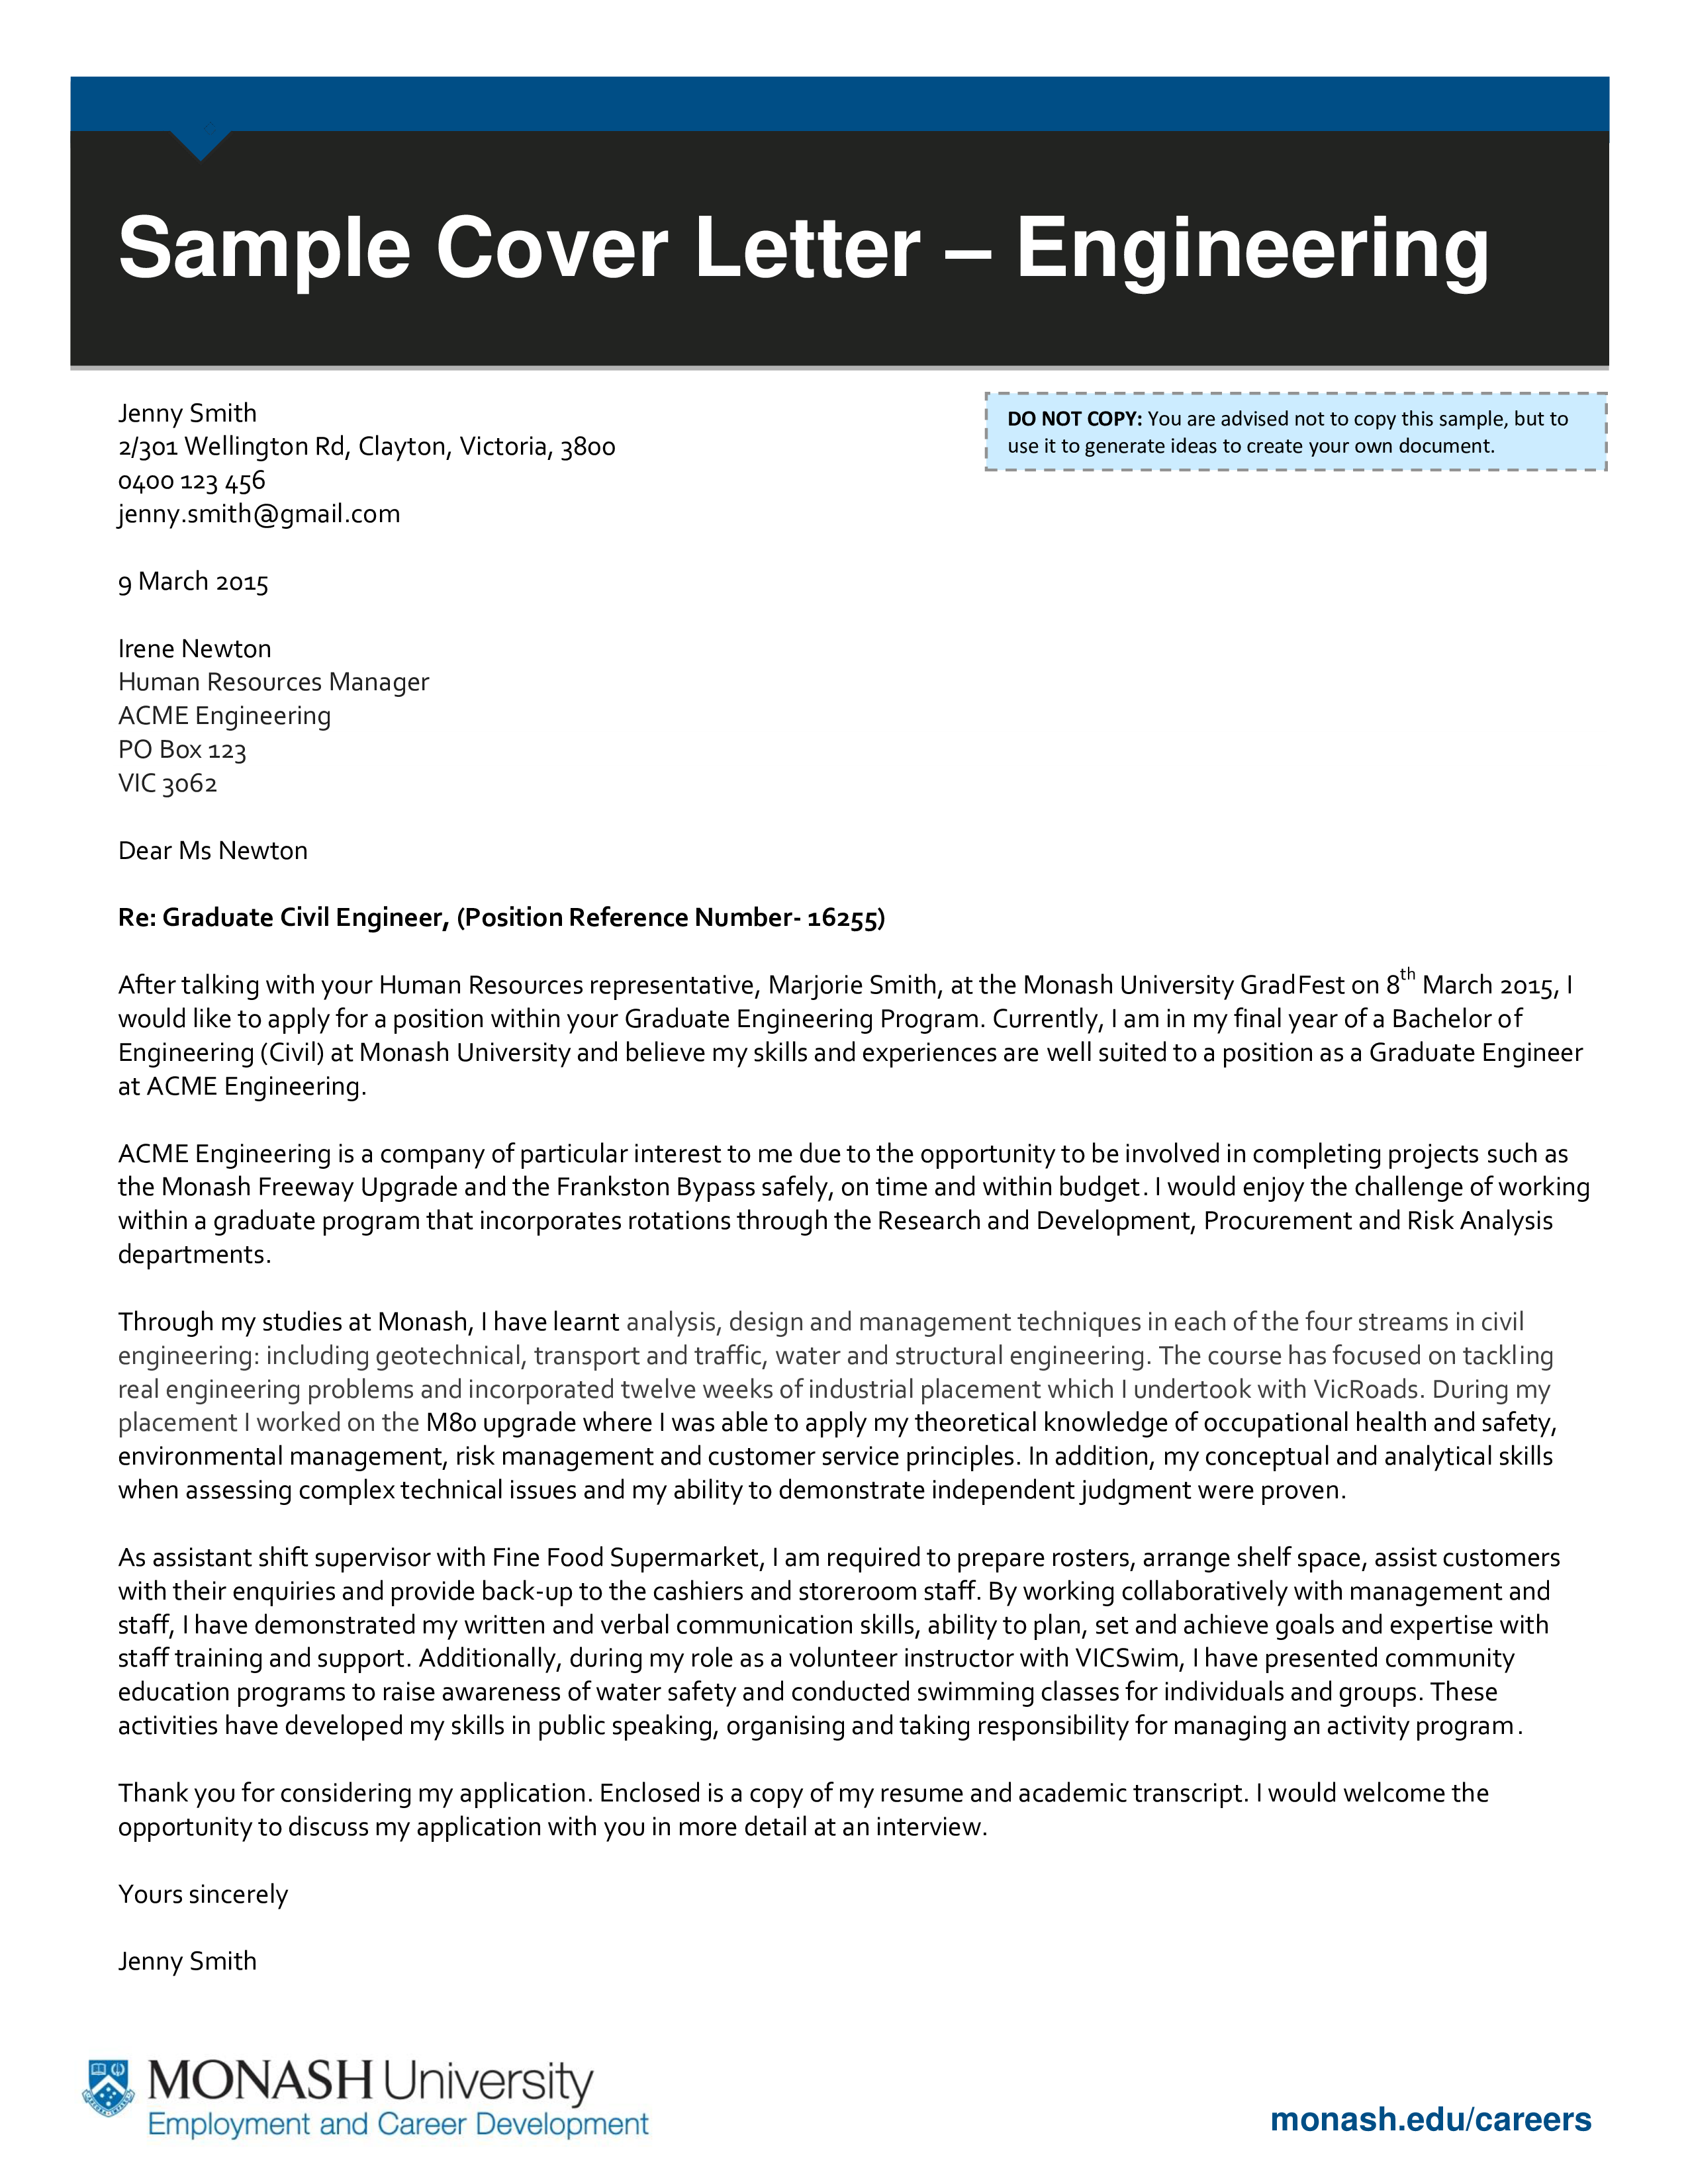 Engineering Resume Cover Letter Sample Templates at